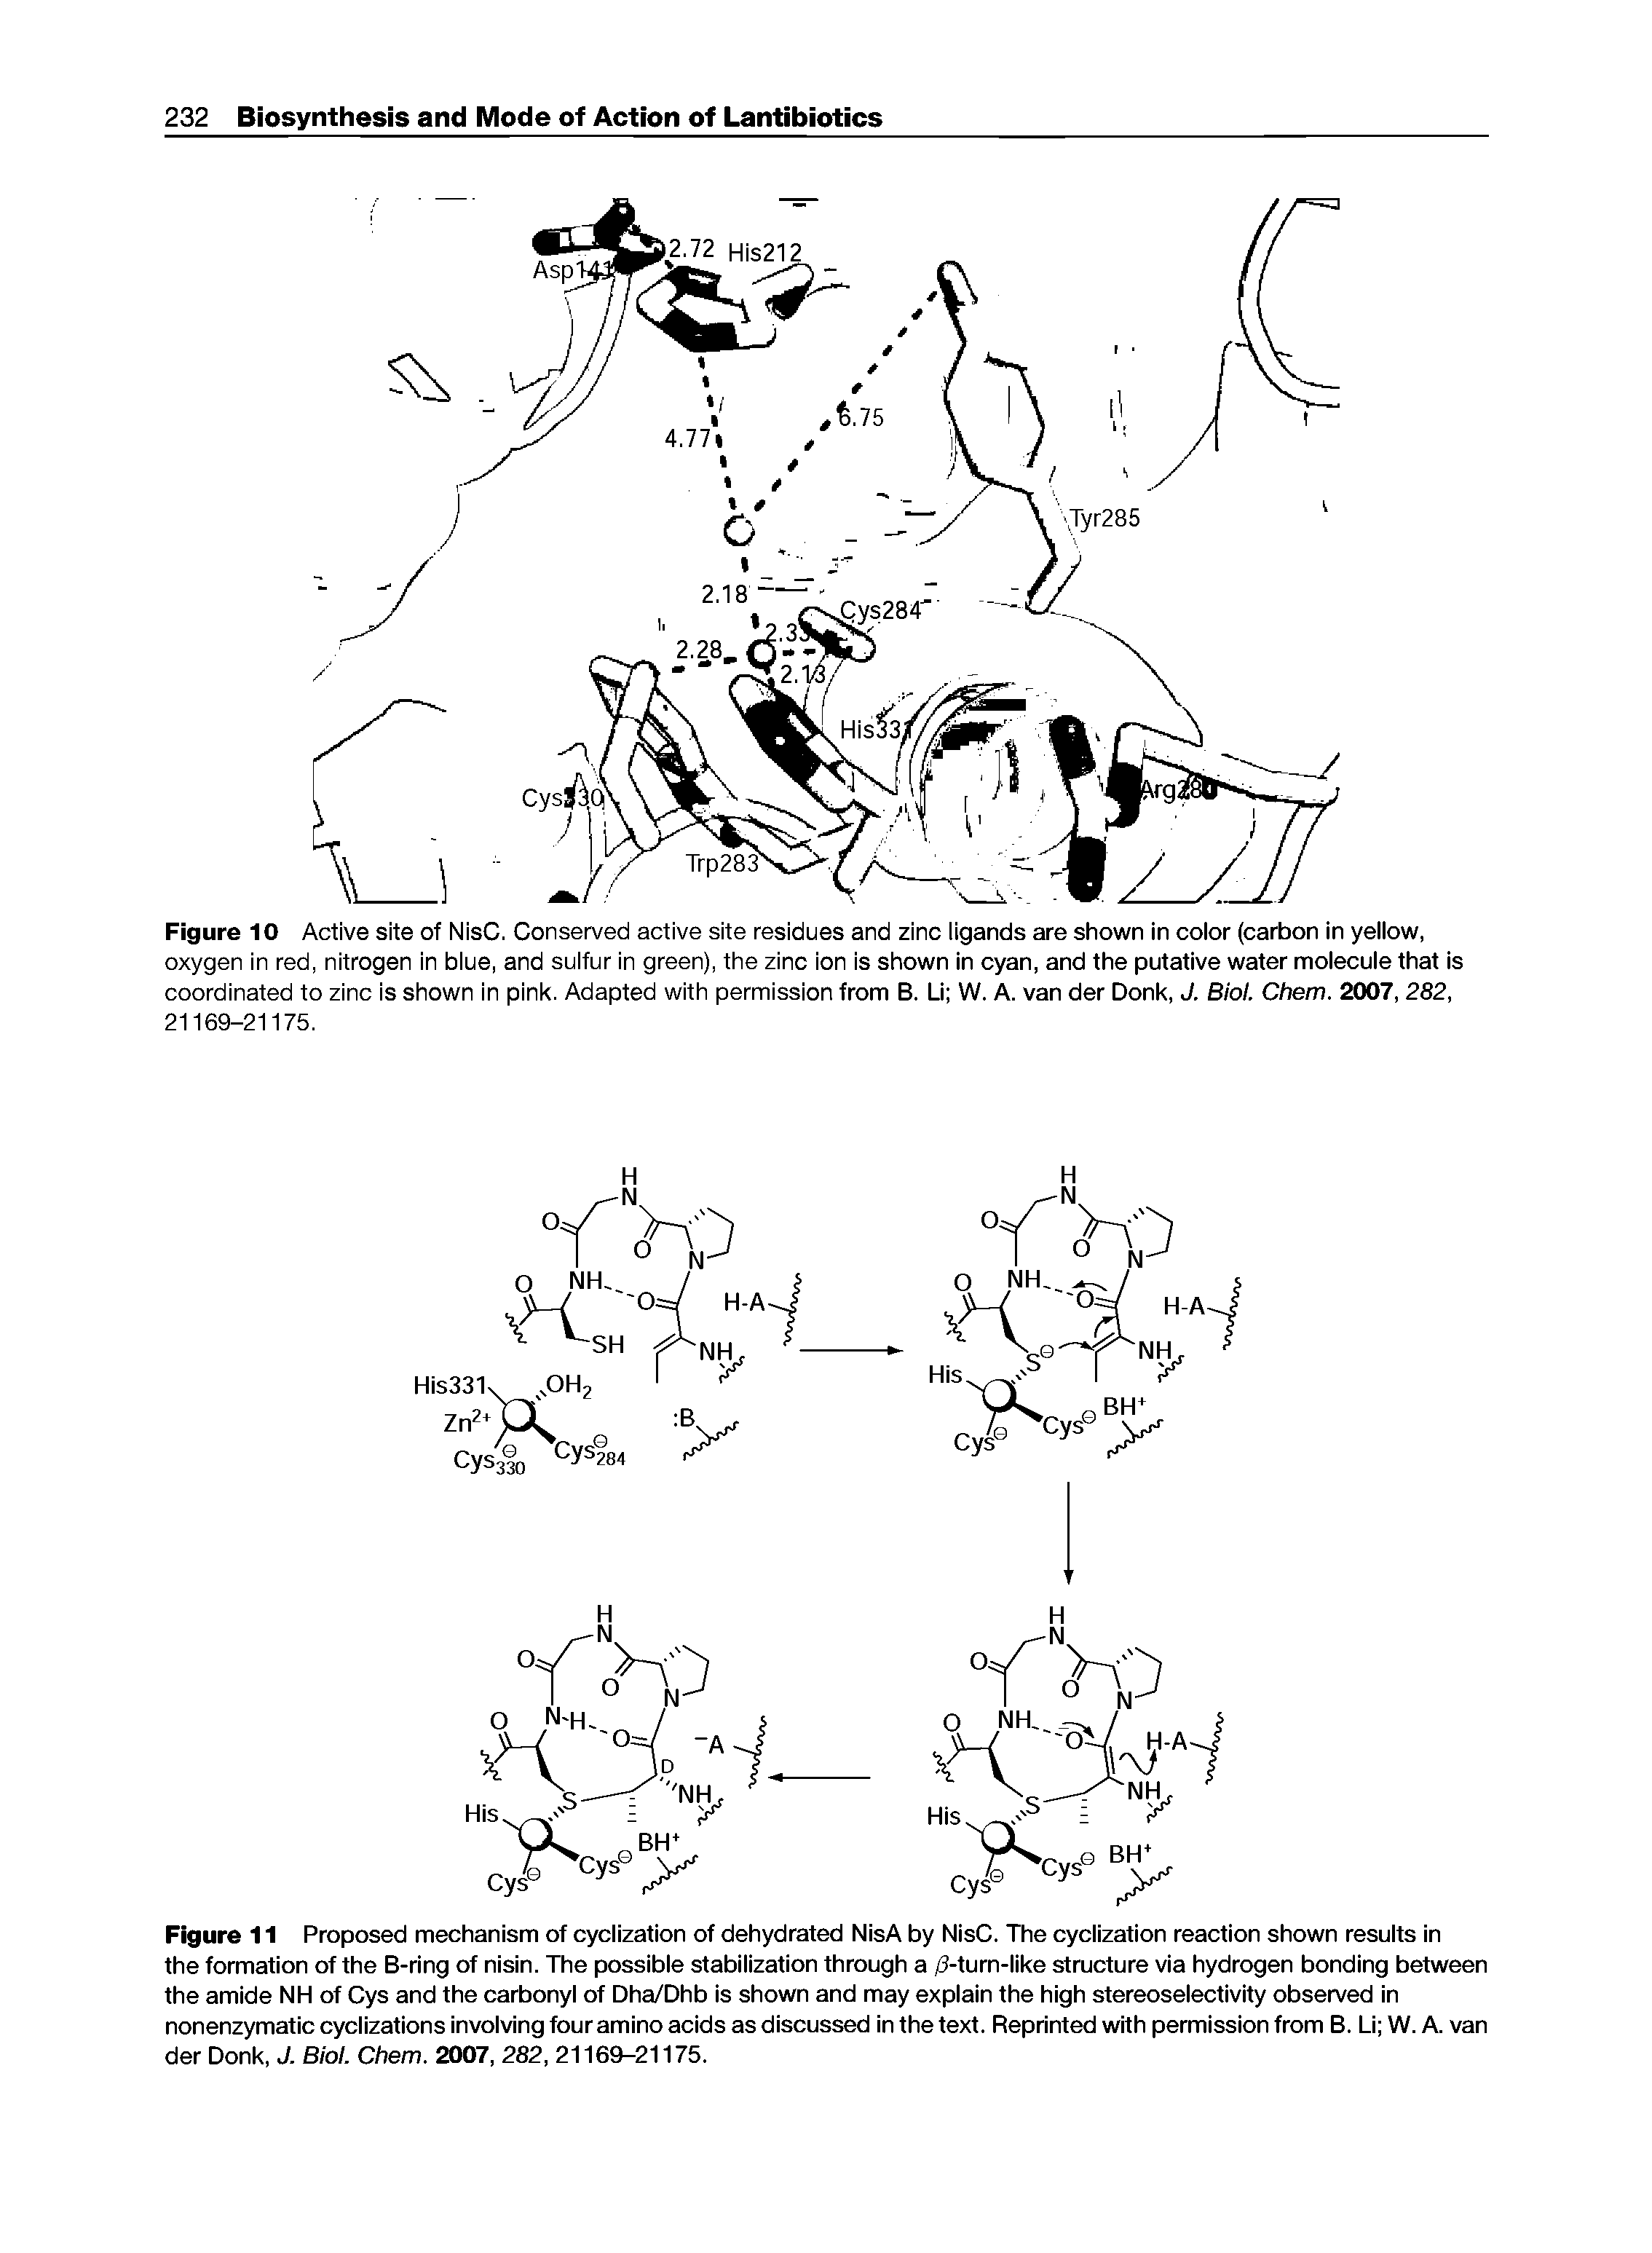 Figure 11 Proposed mechanism of cyclization of dehydrated NisA by NisC. The cyclization reaction shown results in the formation of the B-ring of nisin. The possible stabilization through a /3-turn-like structure via hydrogen bonding between the amide NH of Cys and the carbonyl of Dha/Dhb is shown and may explain the high stereoselectivity observed in nonenzymatic cyclizations involving four amino acids as discussed in the text. Reprinted with permission from B. Li W. A. van der Donk, J. Biol. Chem. 2007, 282, 21169-21175.